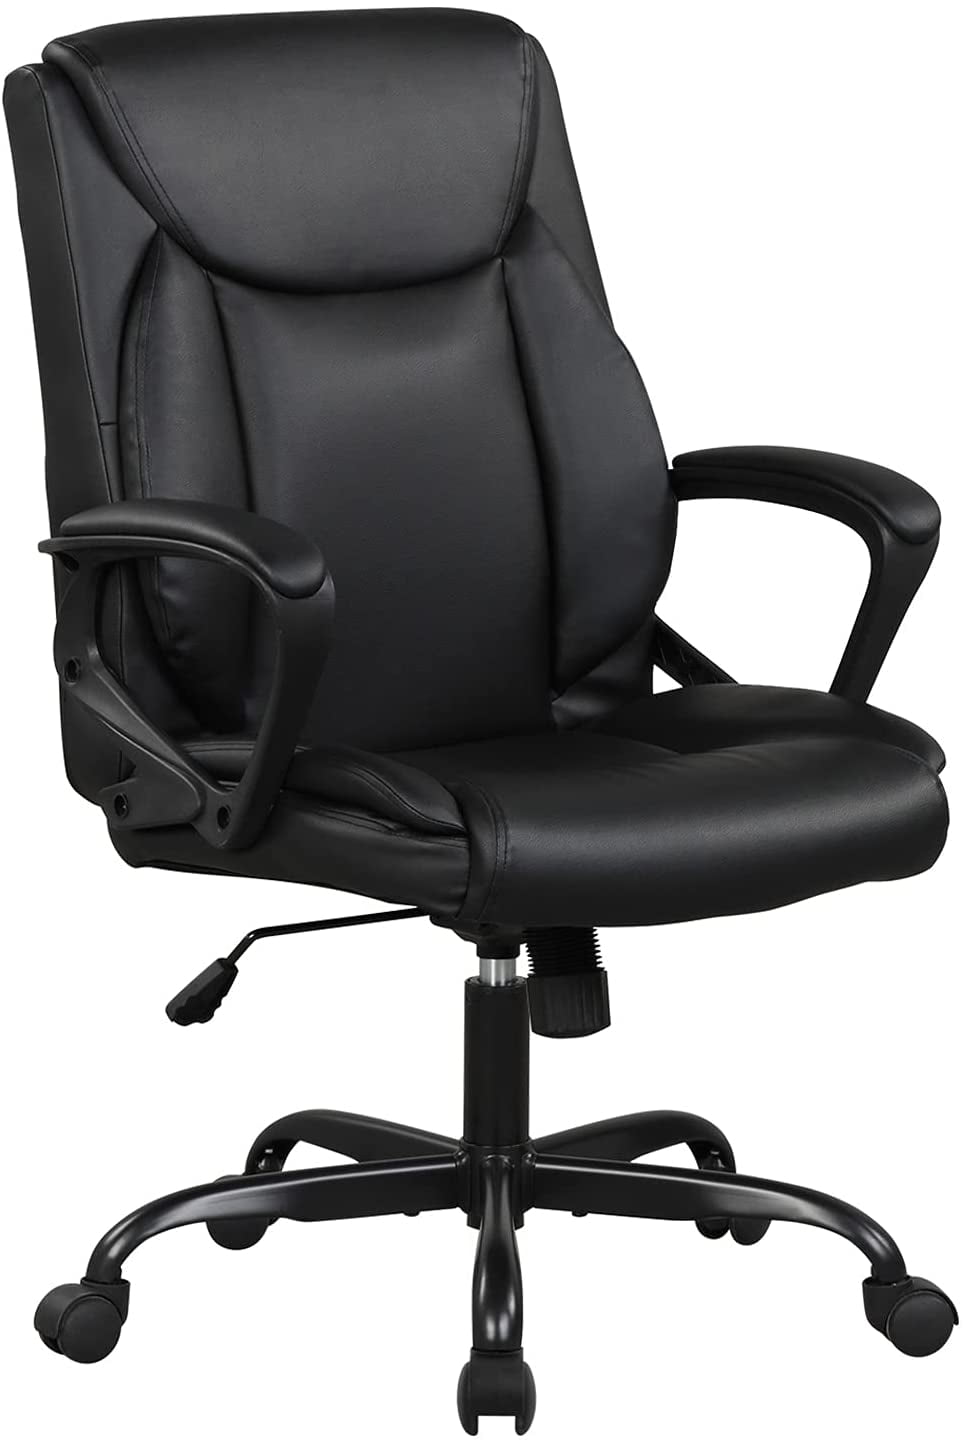 Office Chair Executive Swivel Adjustable Computer Desk Chair with Armrest Chair 